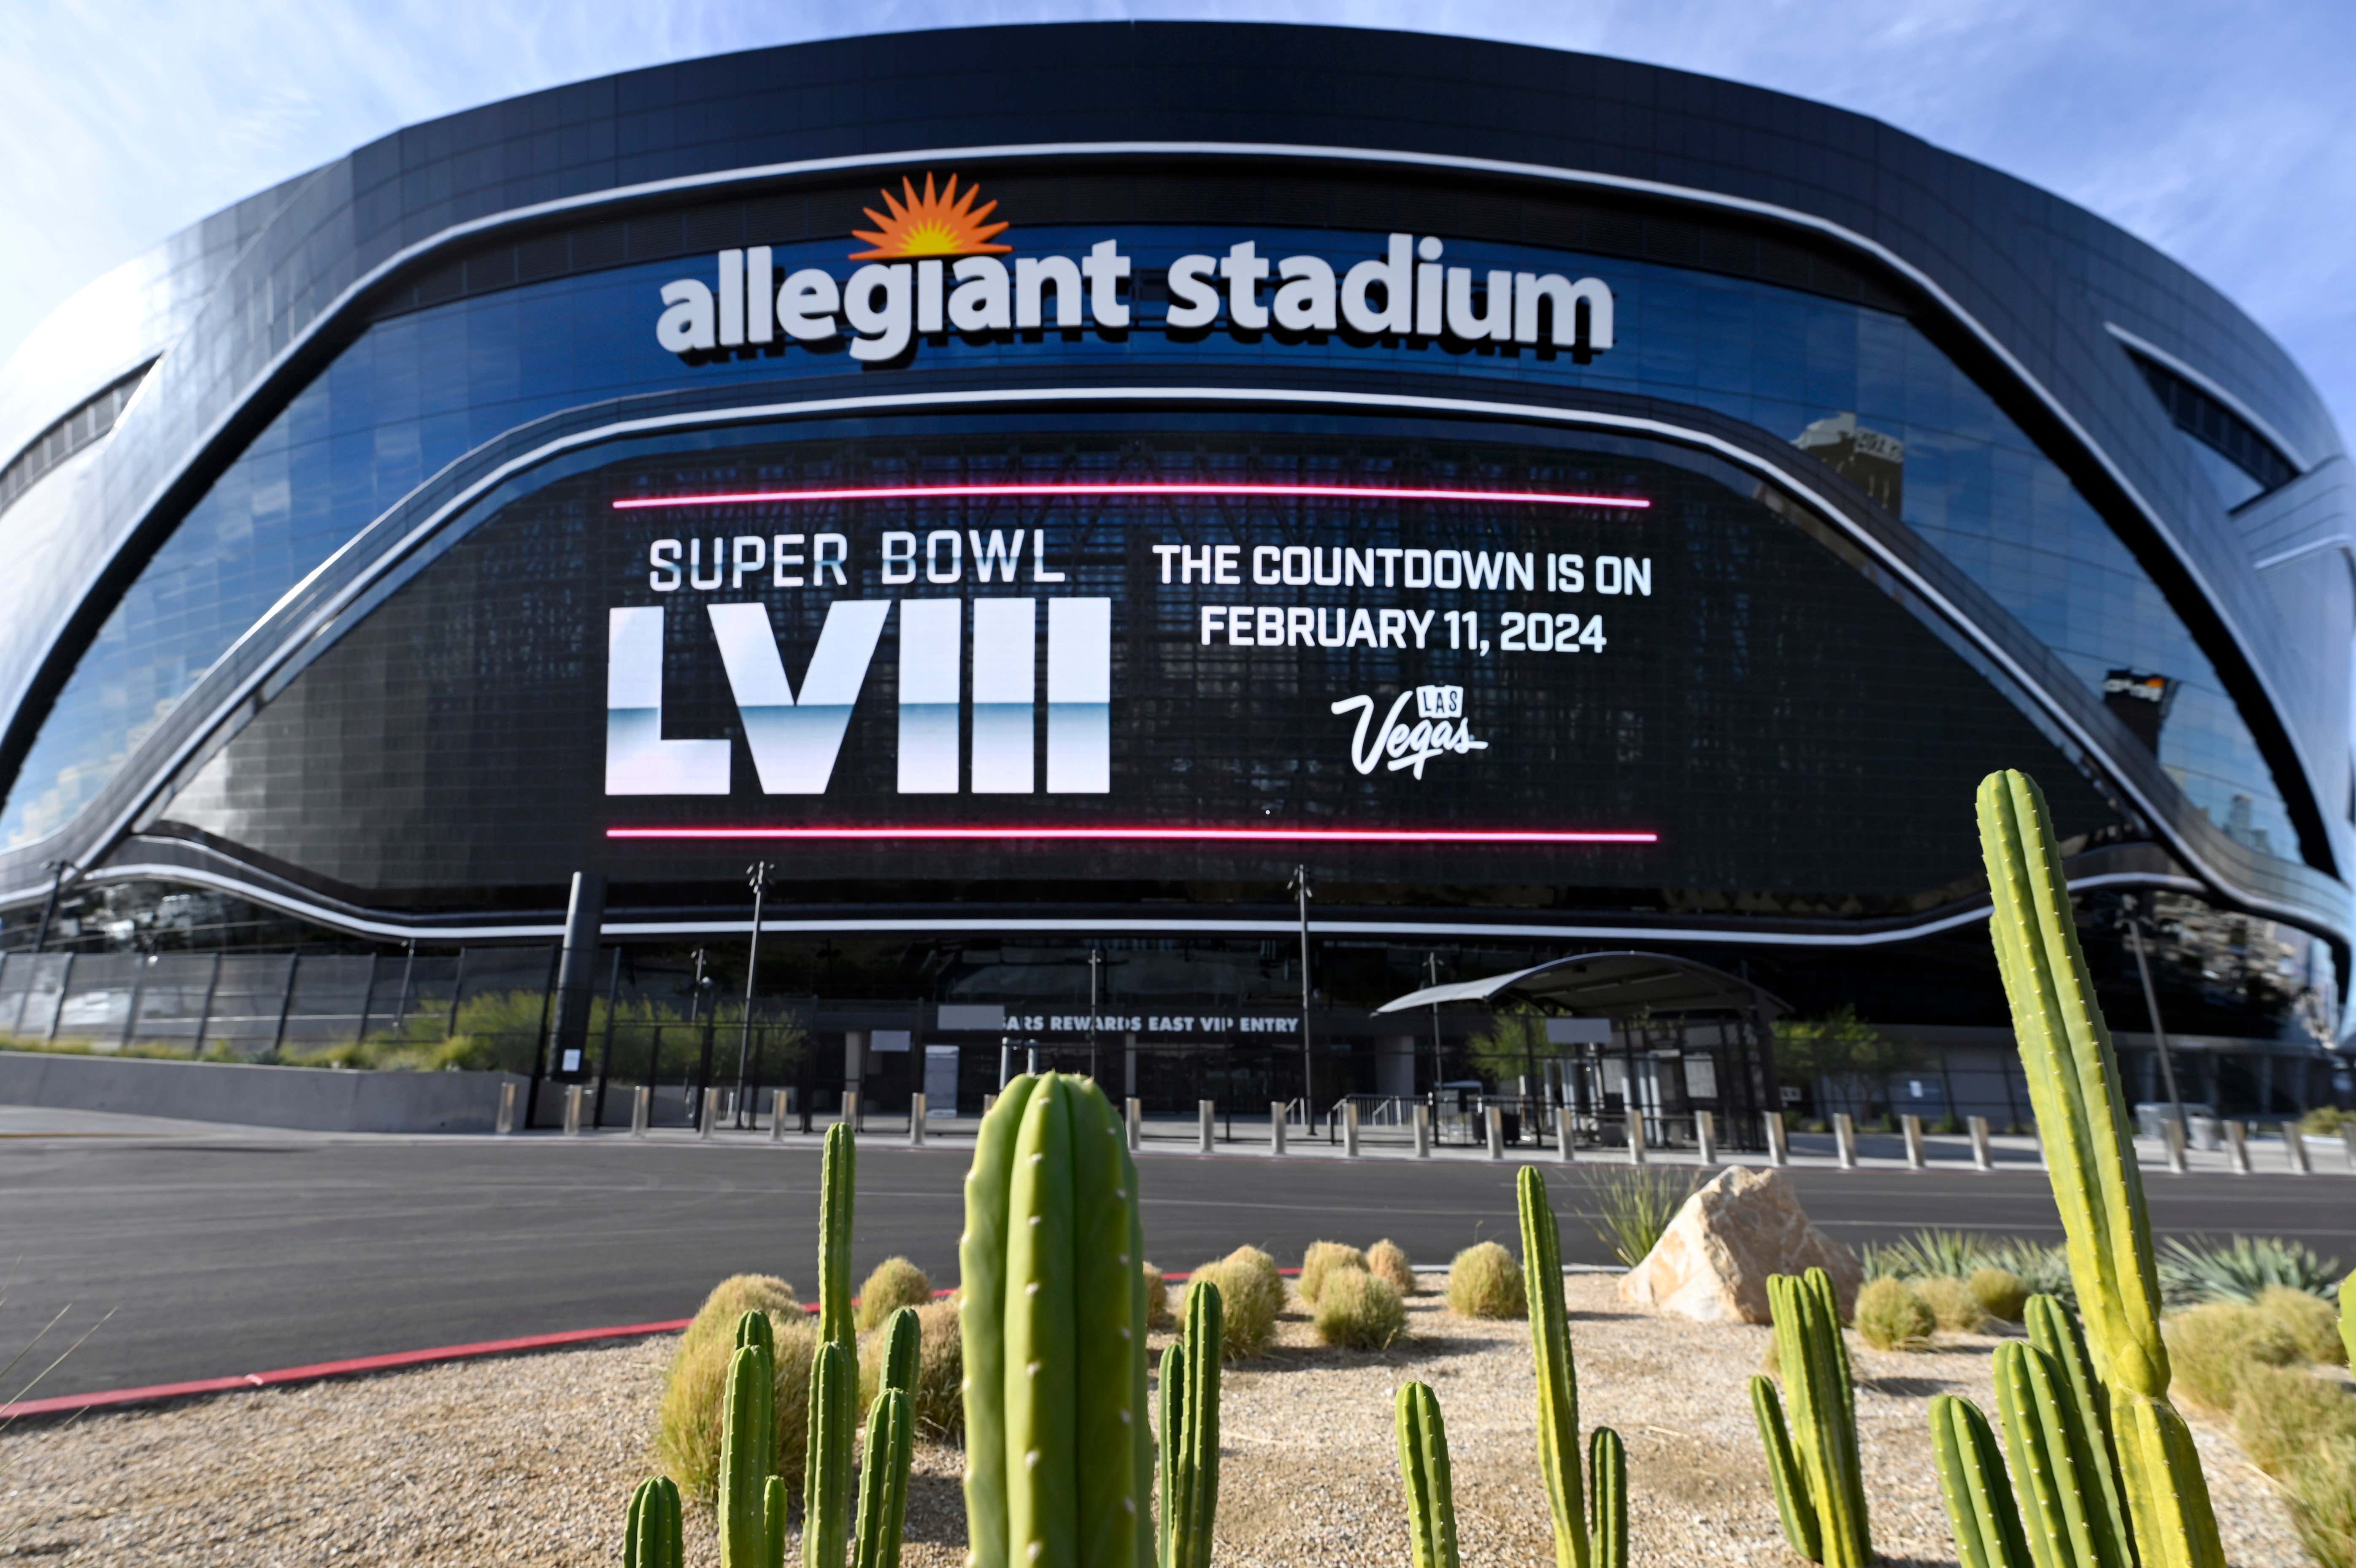 A Conspiracy Theory Has Gone Viral Which Claims the Super Bowl LVIII Logo Gives Away Which Teams Will Be in the Game